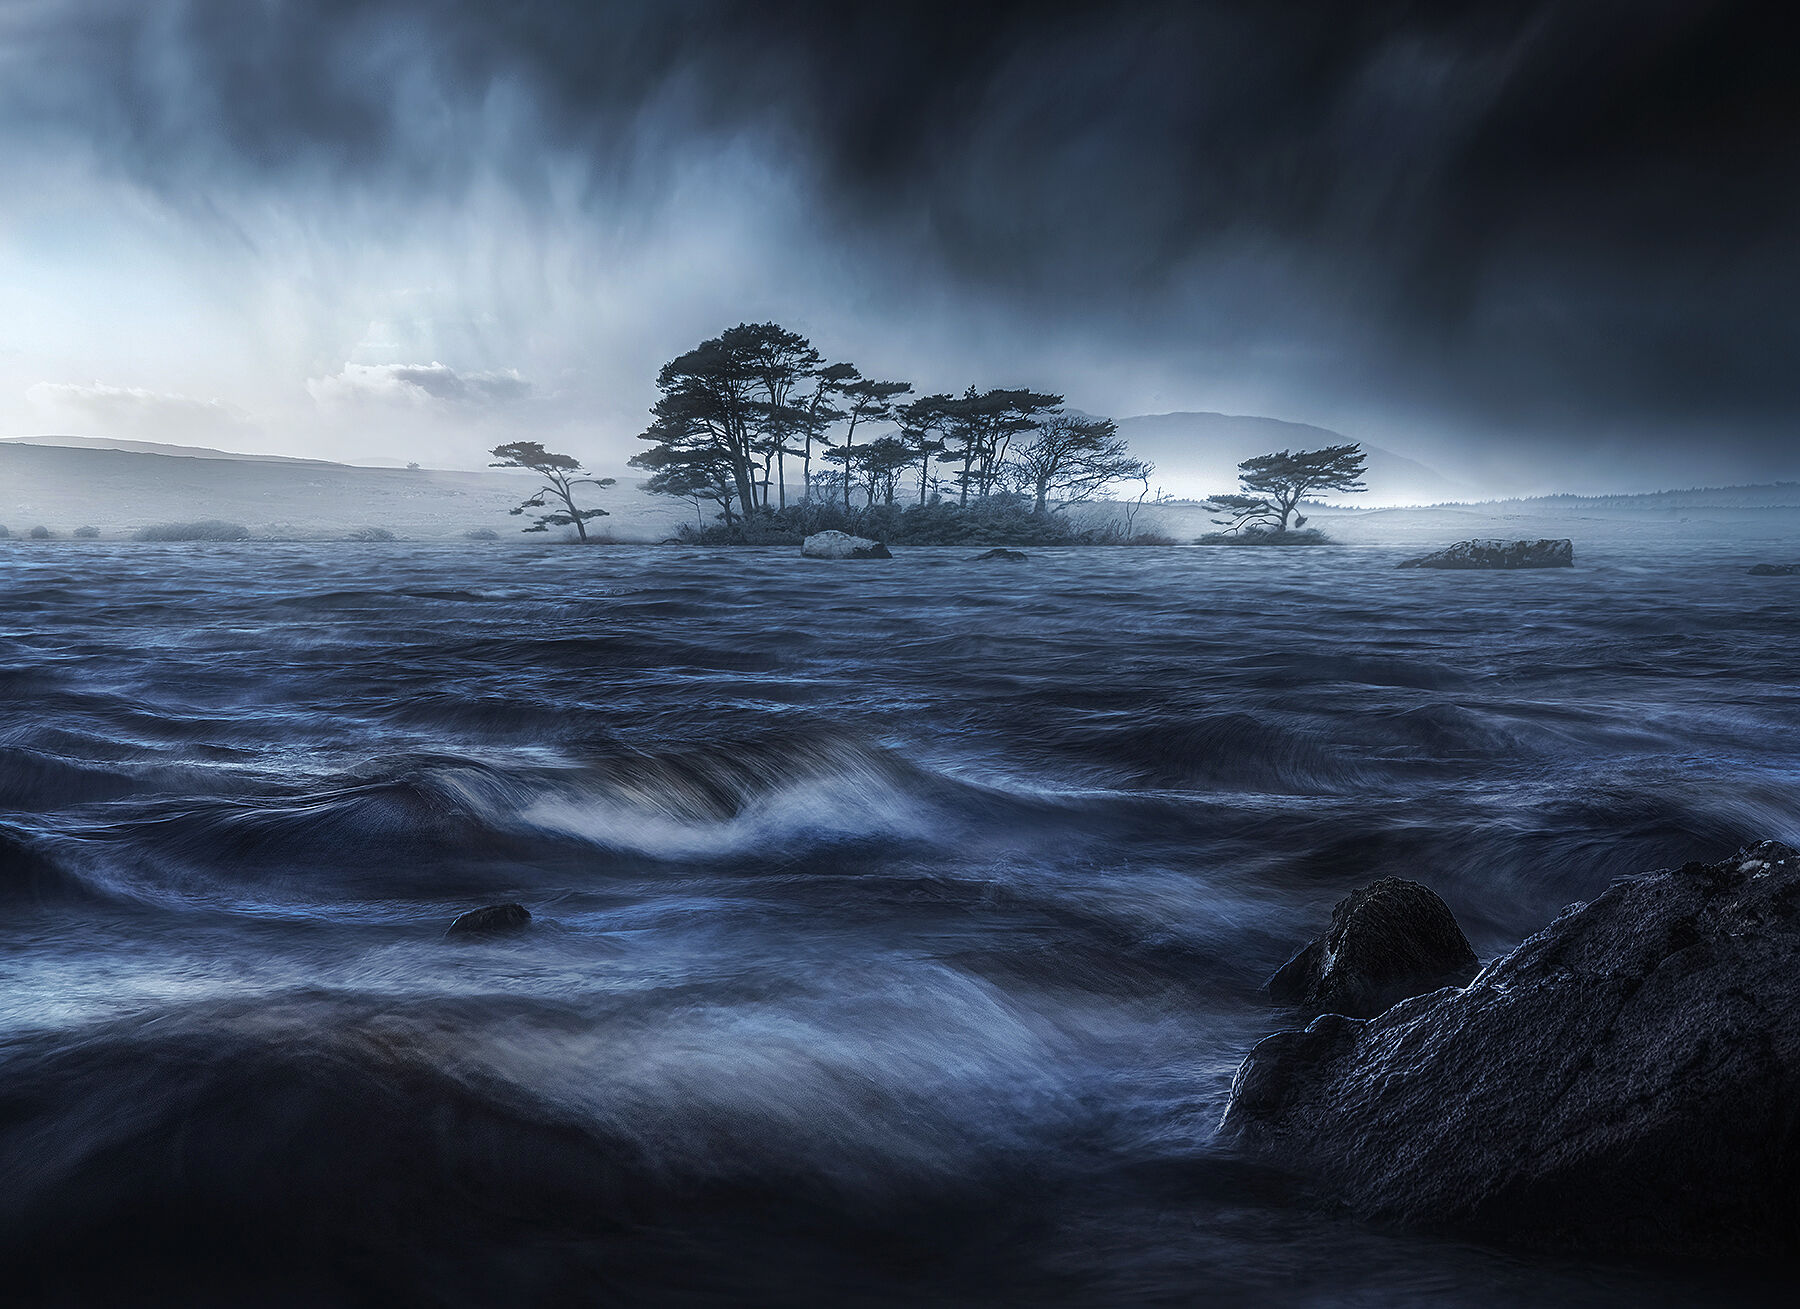 Stormy conditions and fierce winds rolling in off this lake near Connemara in Ireland